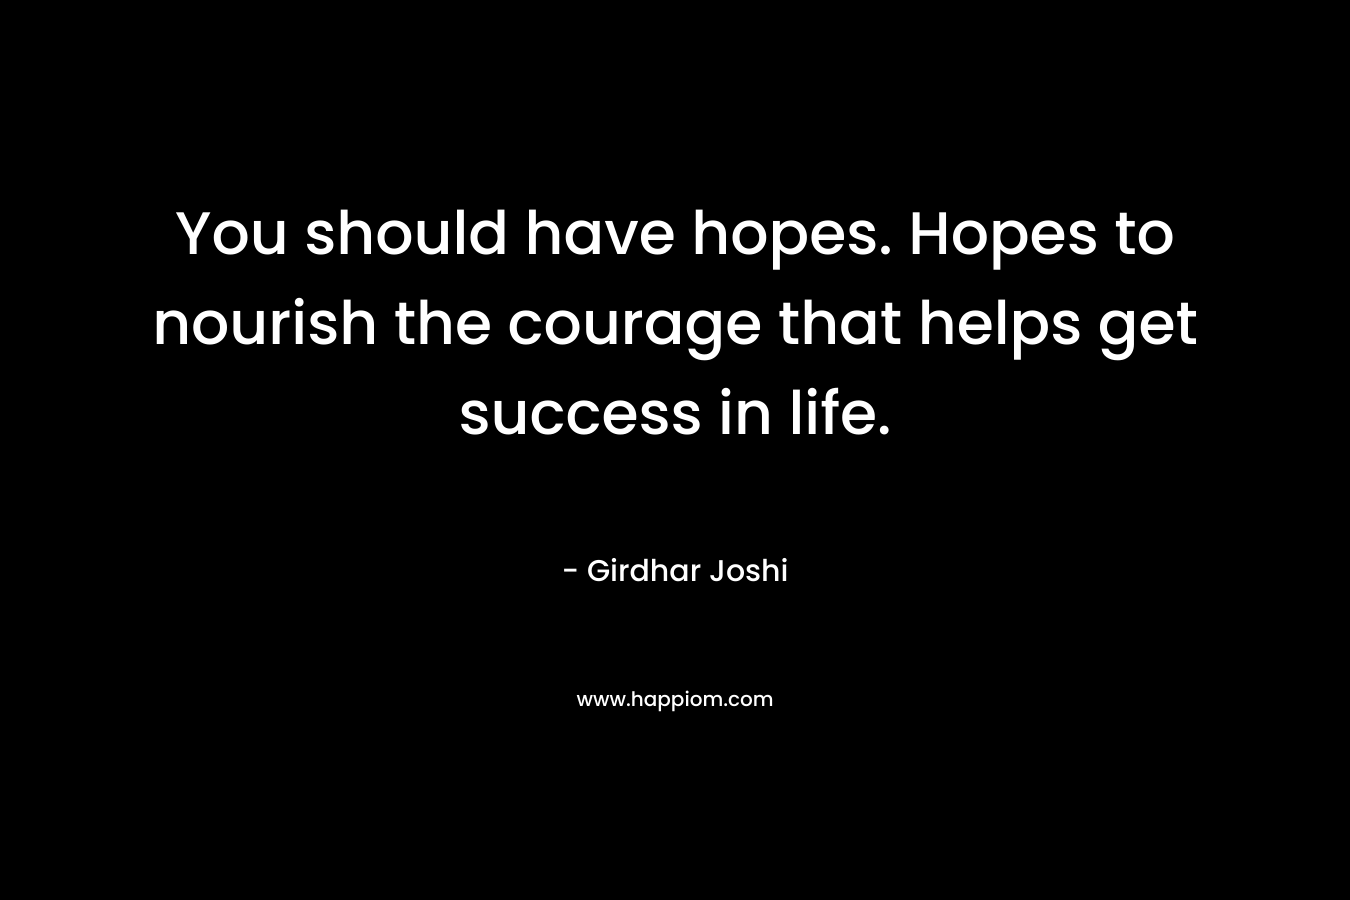 You should have hopes. Hopes to nourish the courage that helps get success in life.